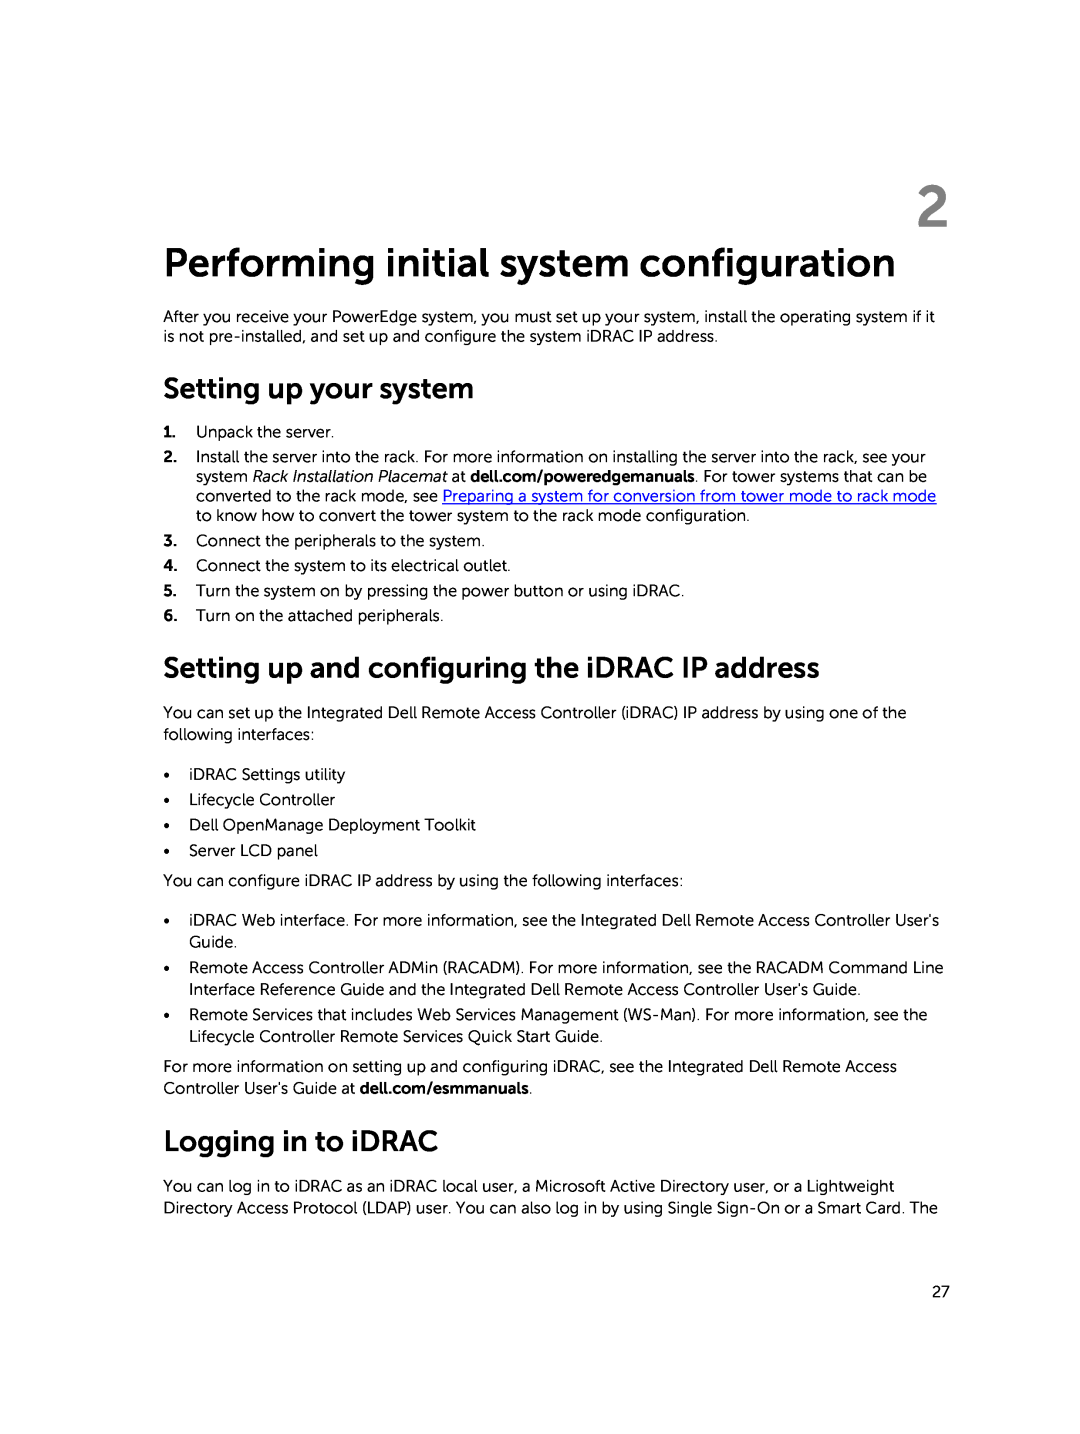 Dell E30S Performing initial system configuration, Setting up your system, Setting up and configuring the iDRAC IP address 